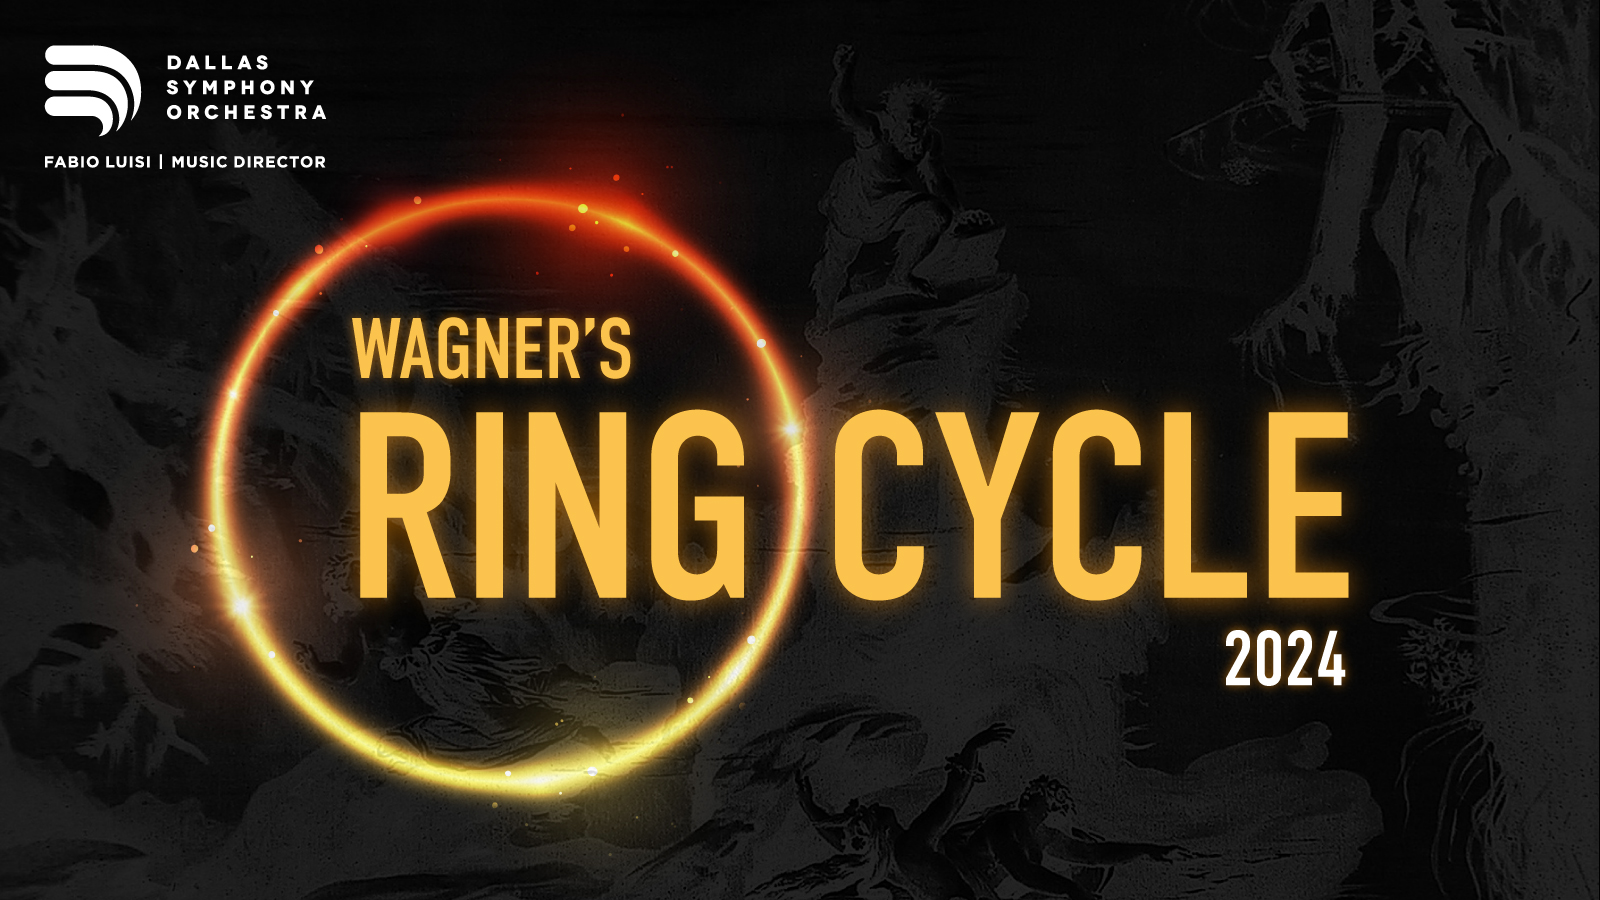 Wagner's Ring Cycle